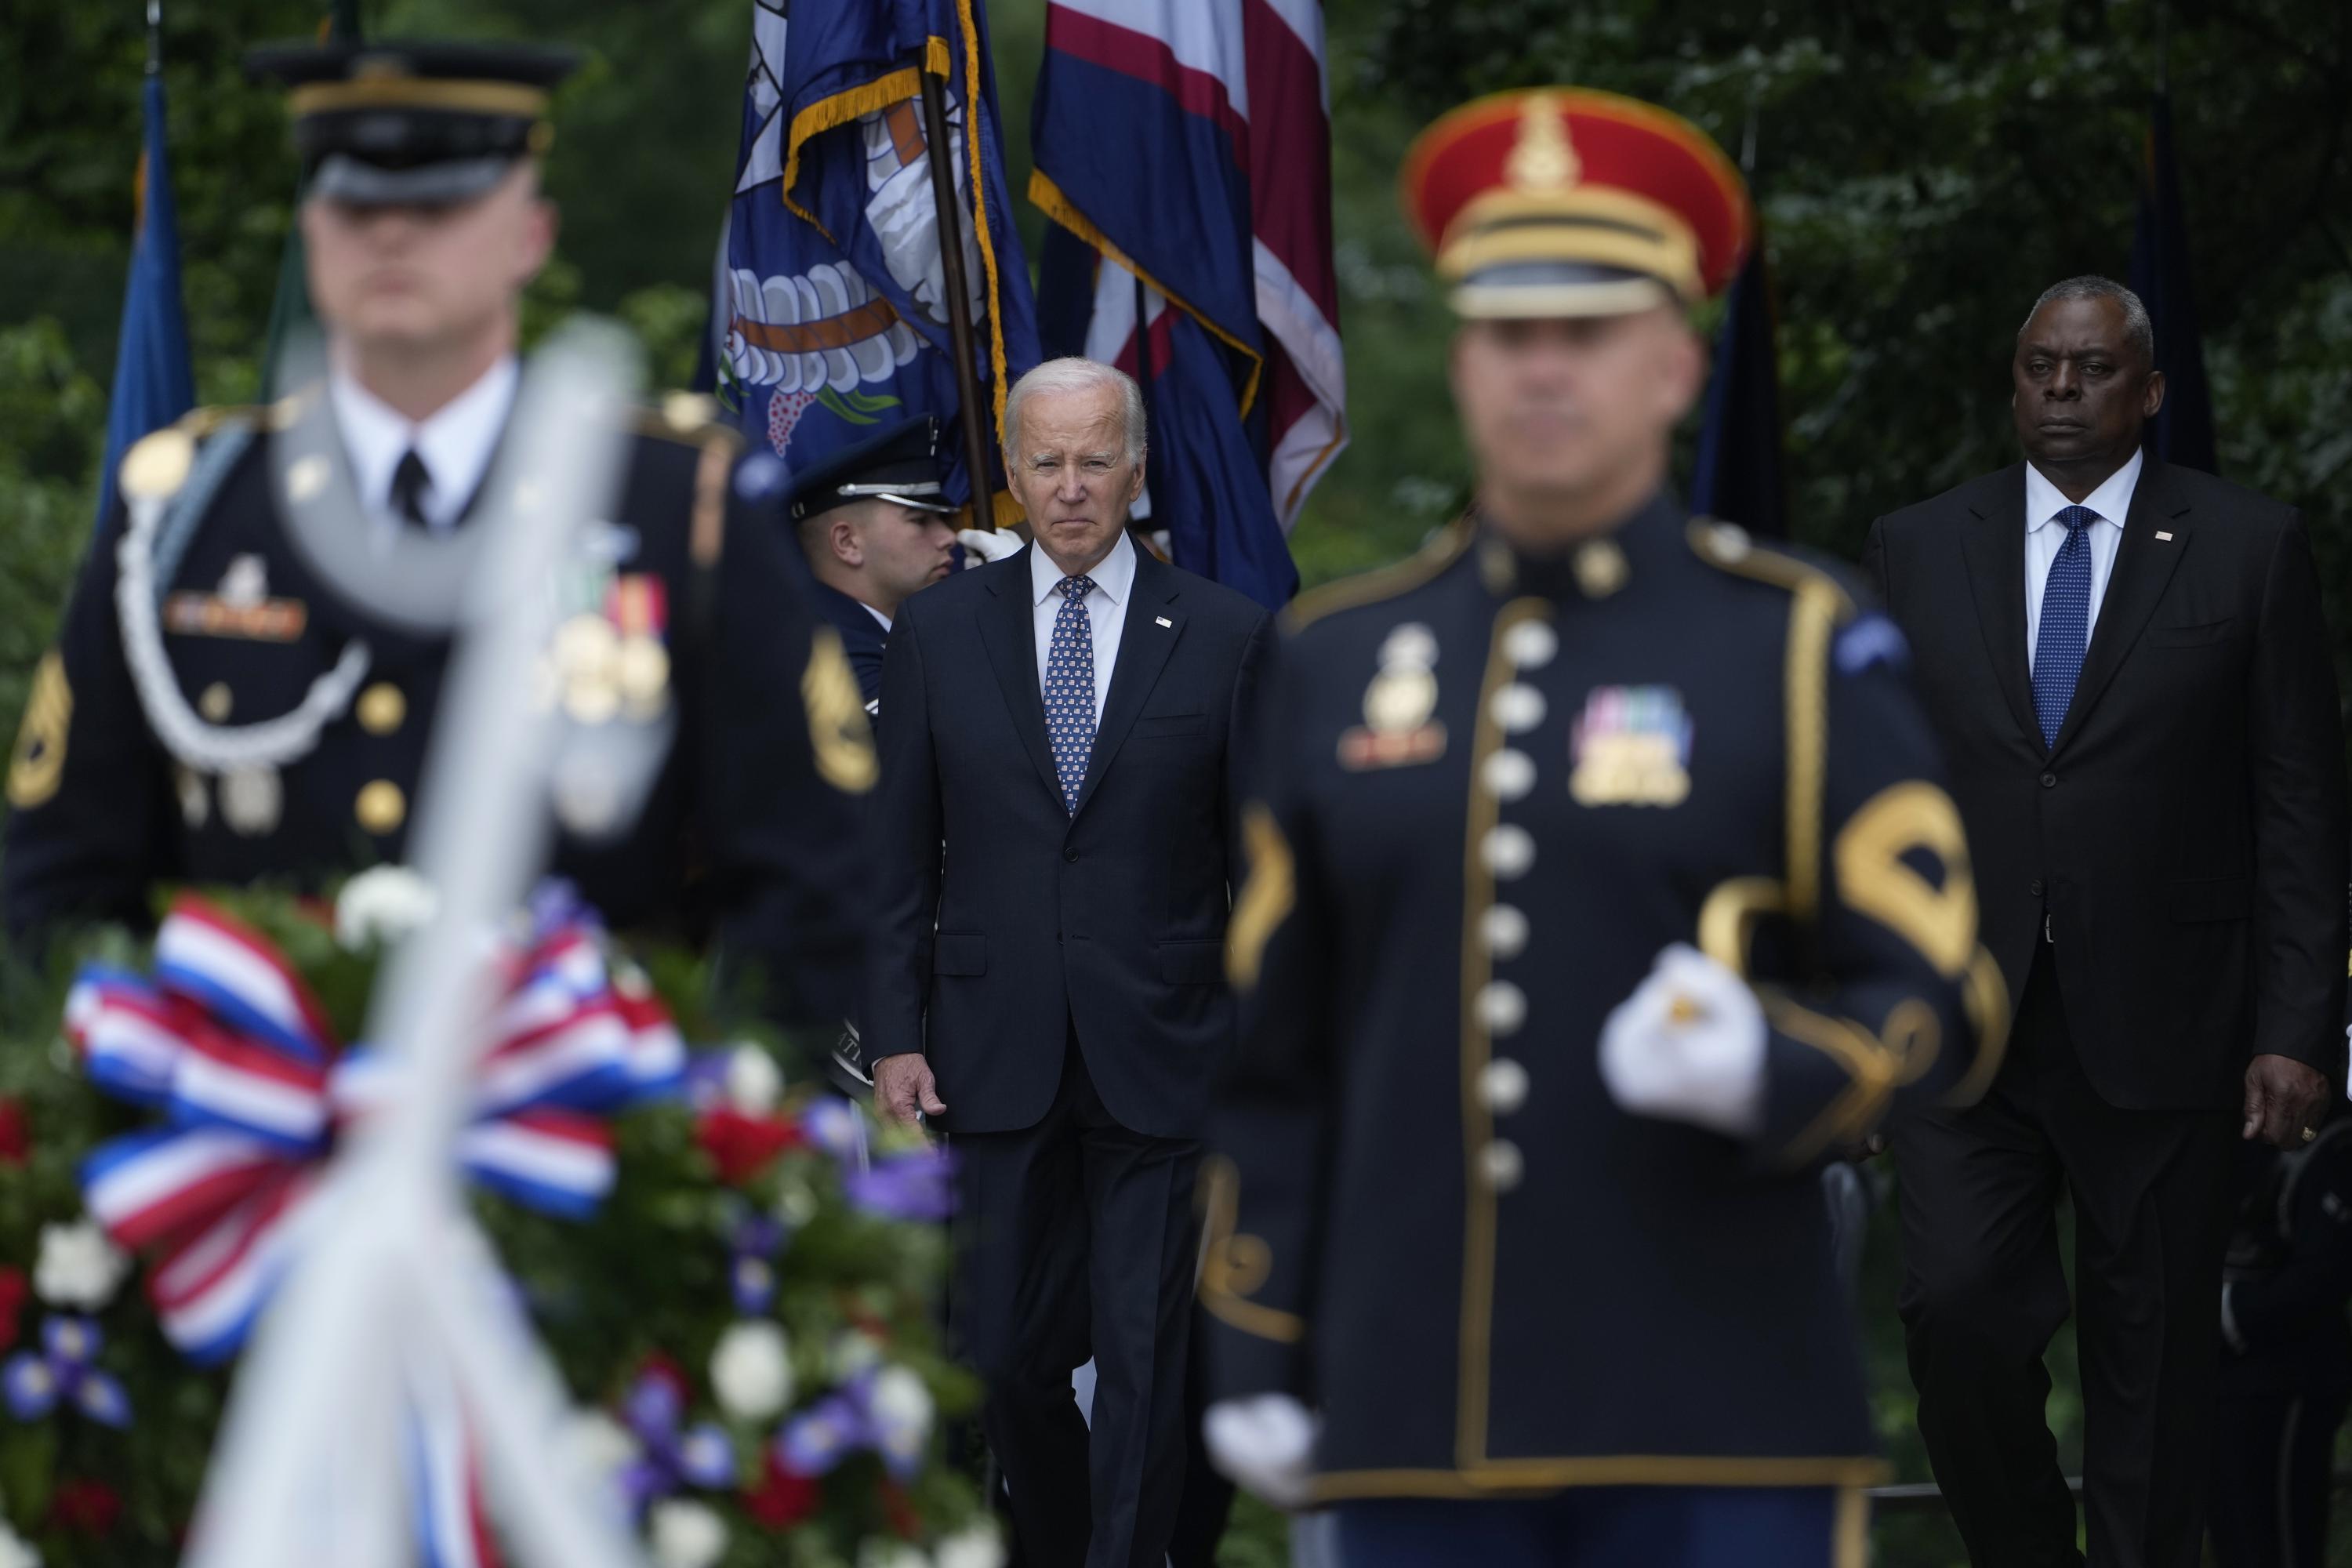 On Memorial Day, Biden praises generations of fallen American troops who ‘gave their all and gave their all.’